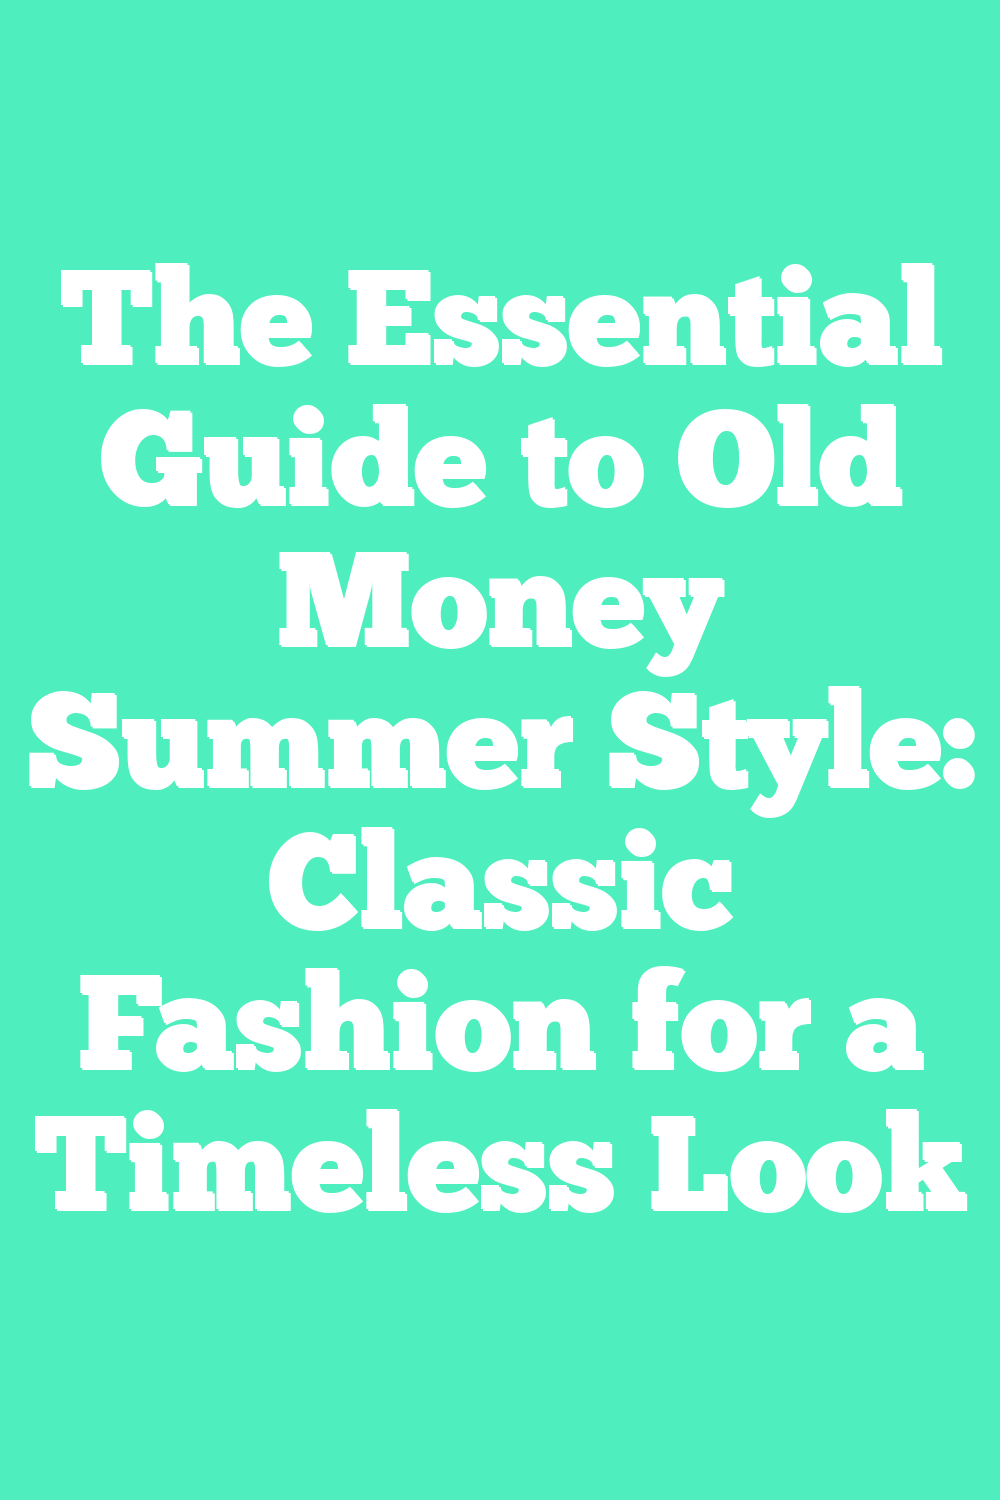 The Essential Guide to Old Money Summer Style: Classic Fashion for a Timeless Look